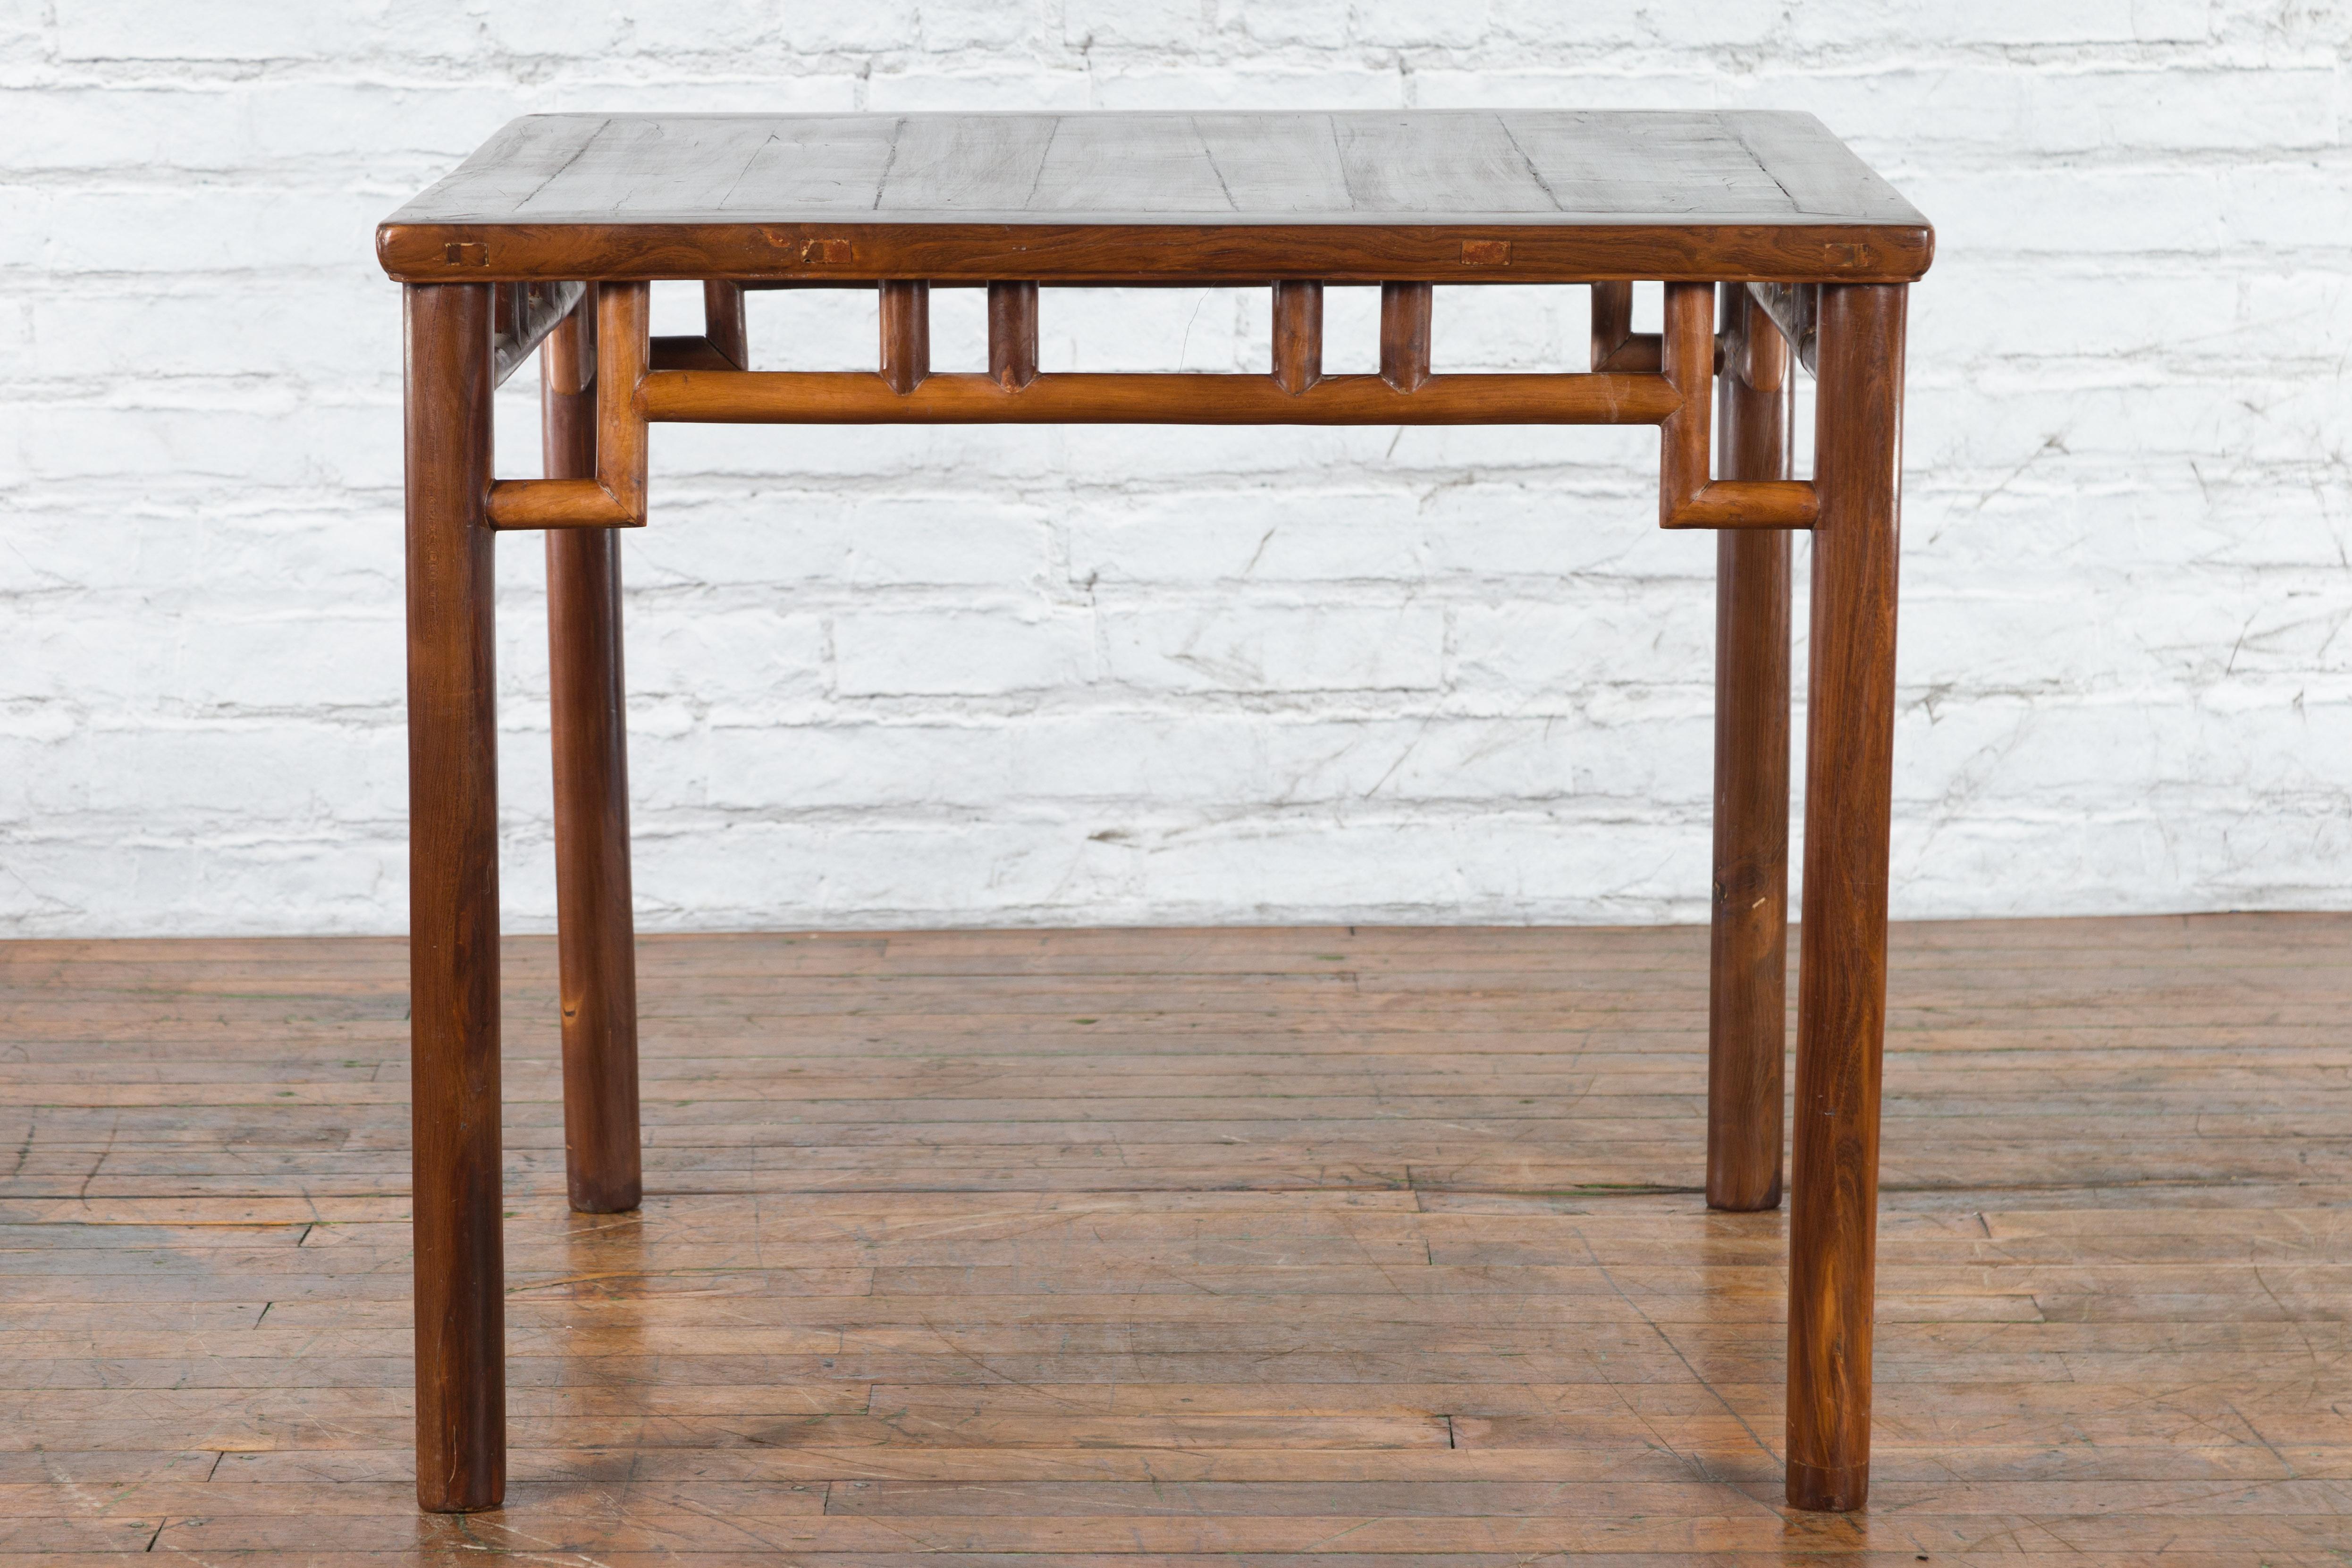 Chinese Qing Dynasty Period 19th Century Game Table with Humpback Stretchers For Sale 11